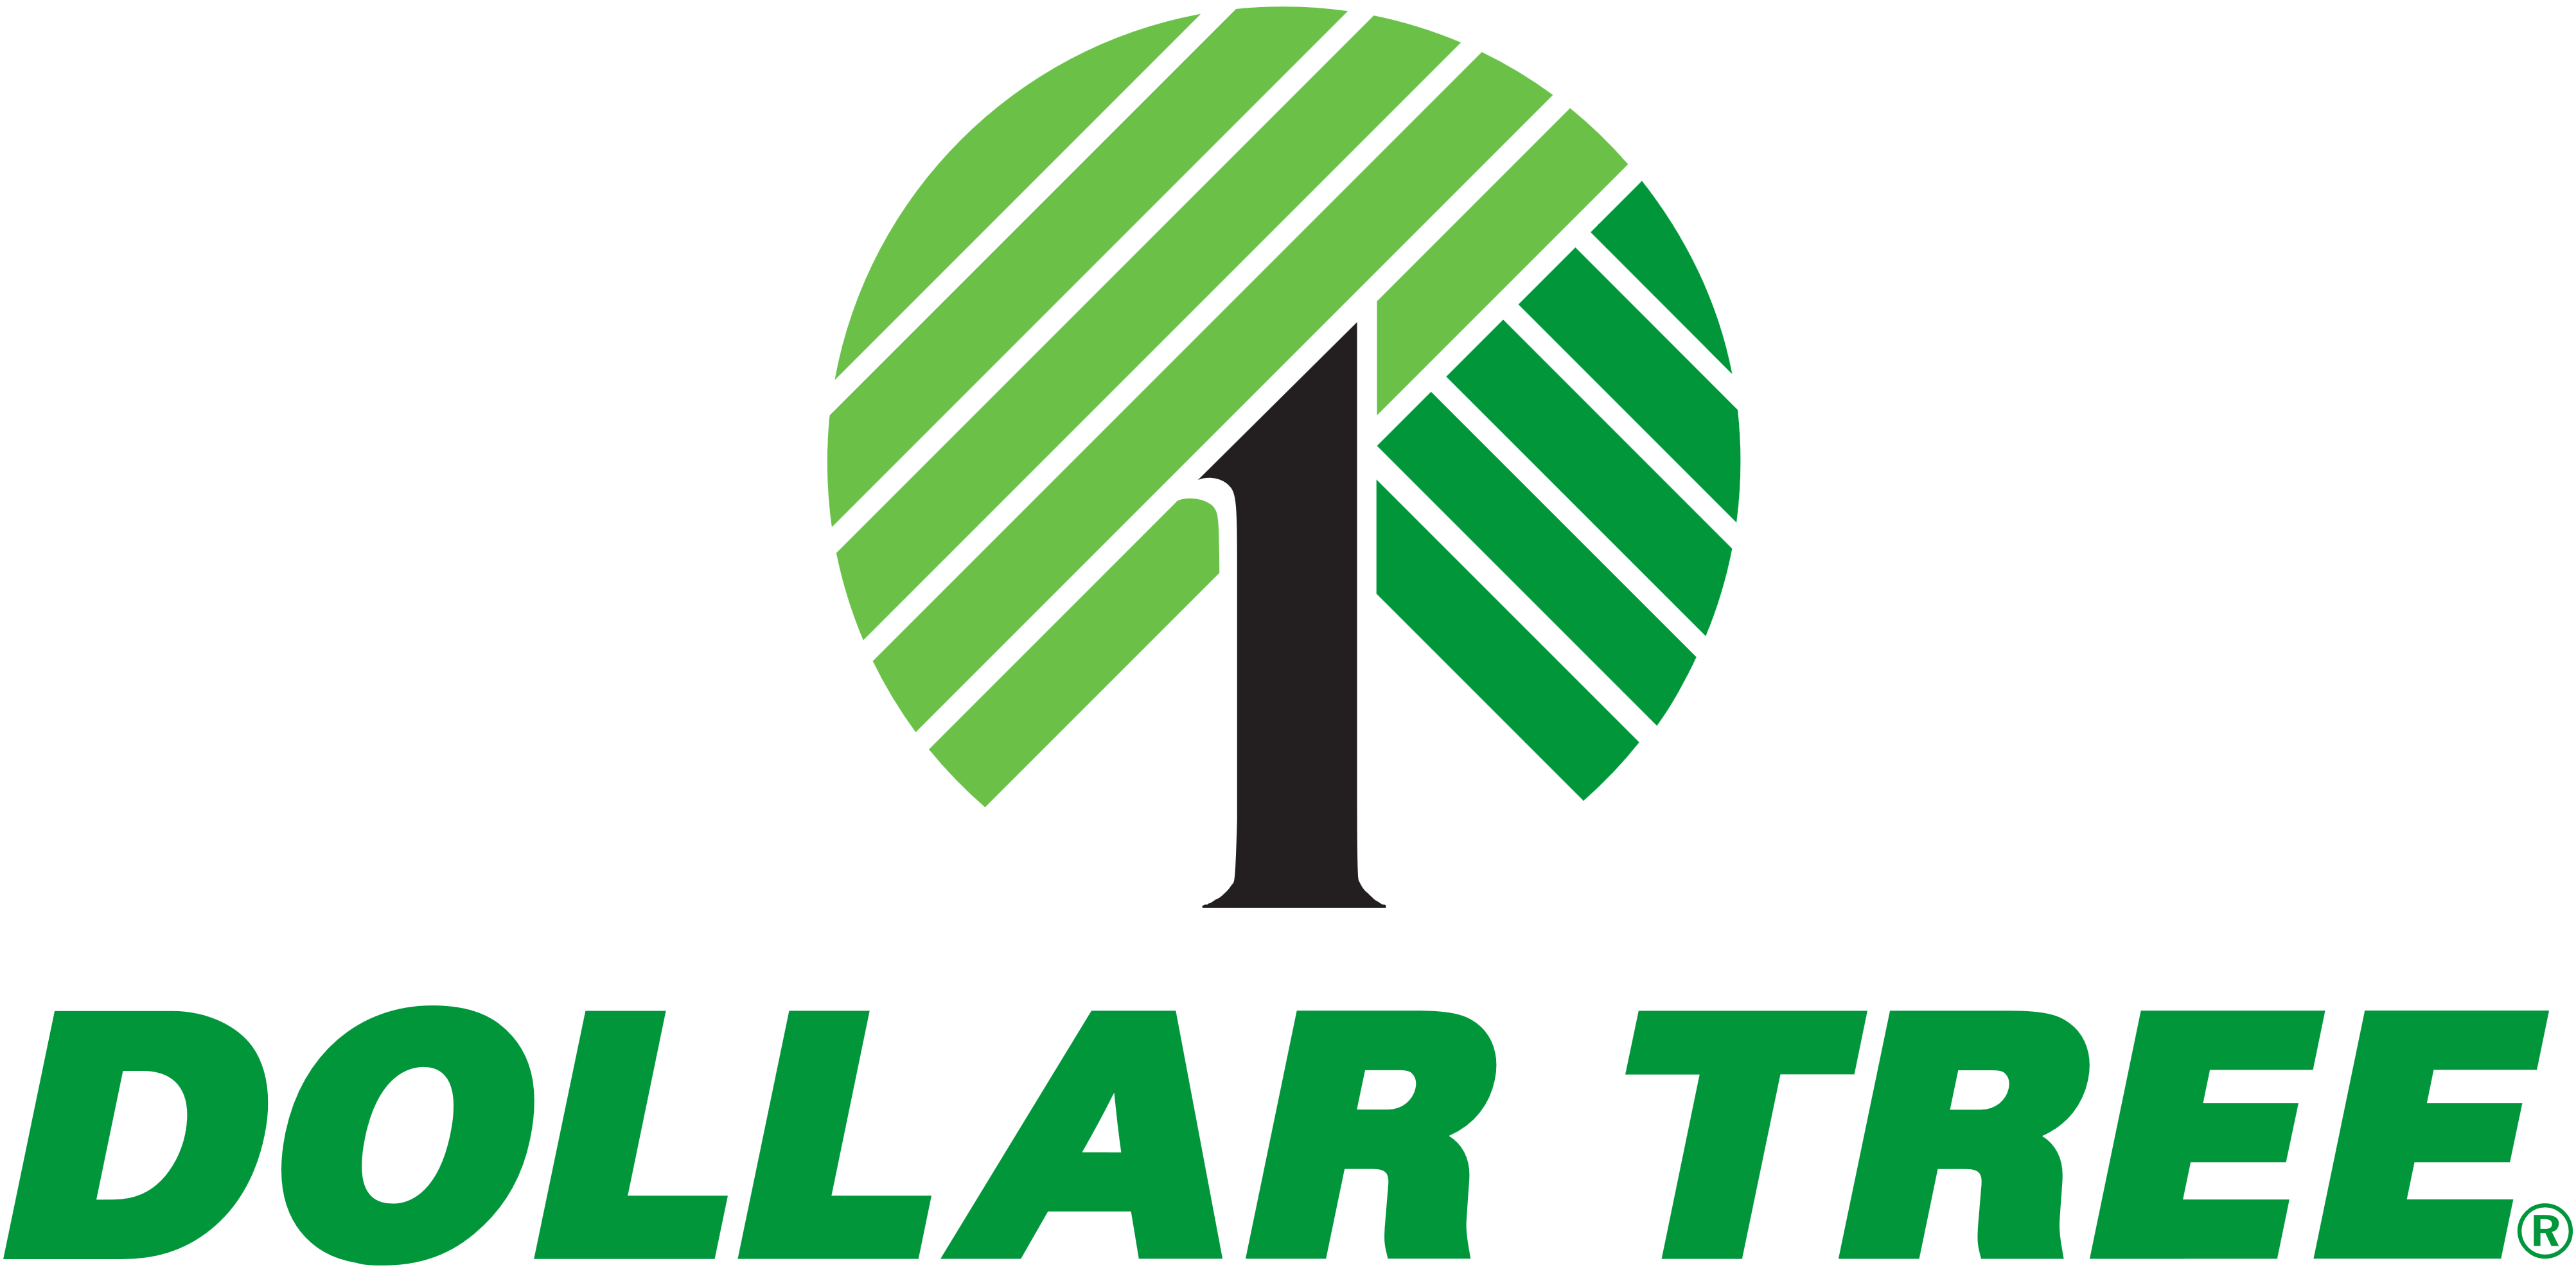 Inspiration Dollar Tree Logo Facts Meaning History And Png Logocharts Your 1 Source For 9271